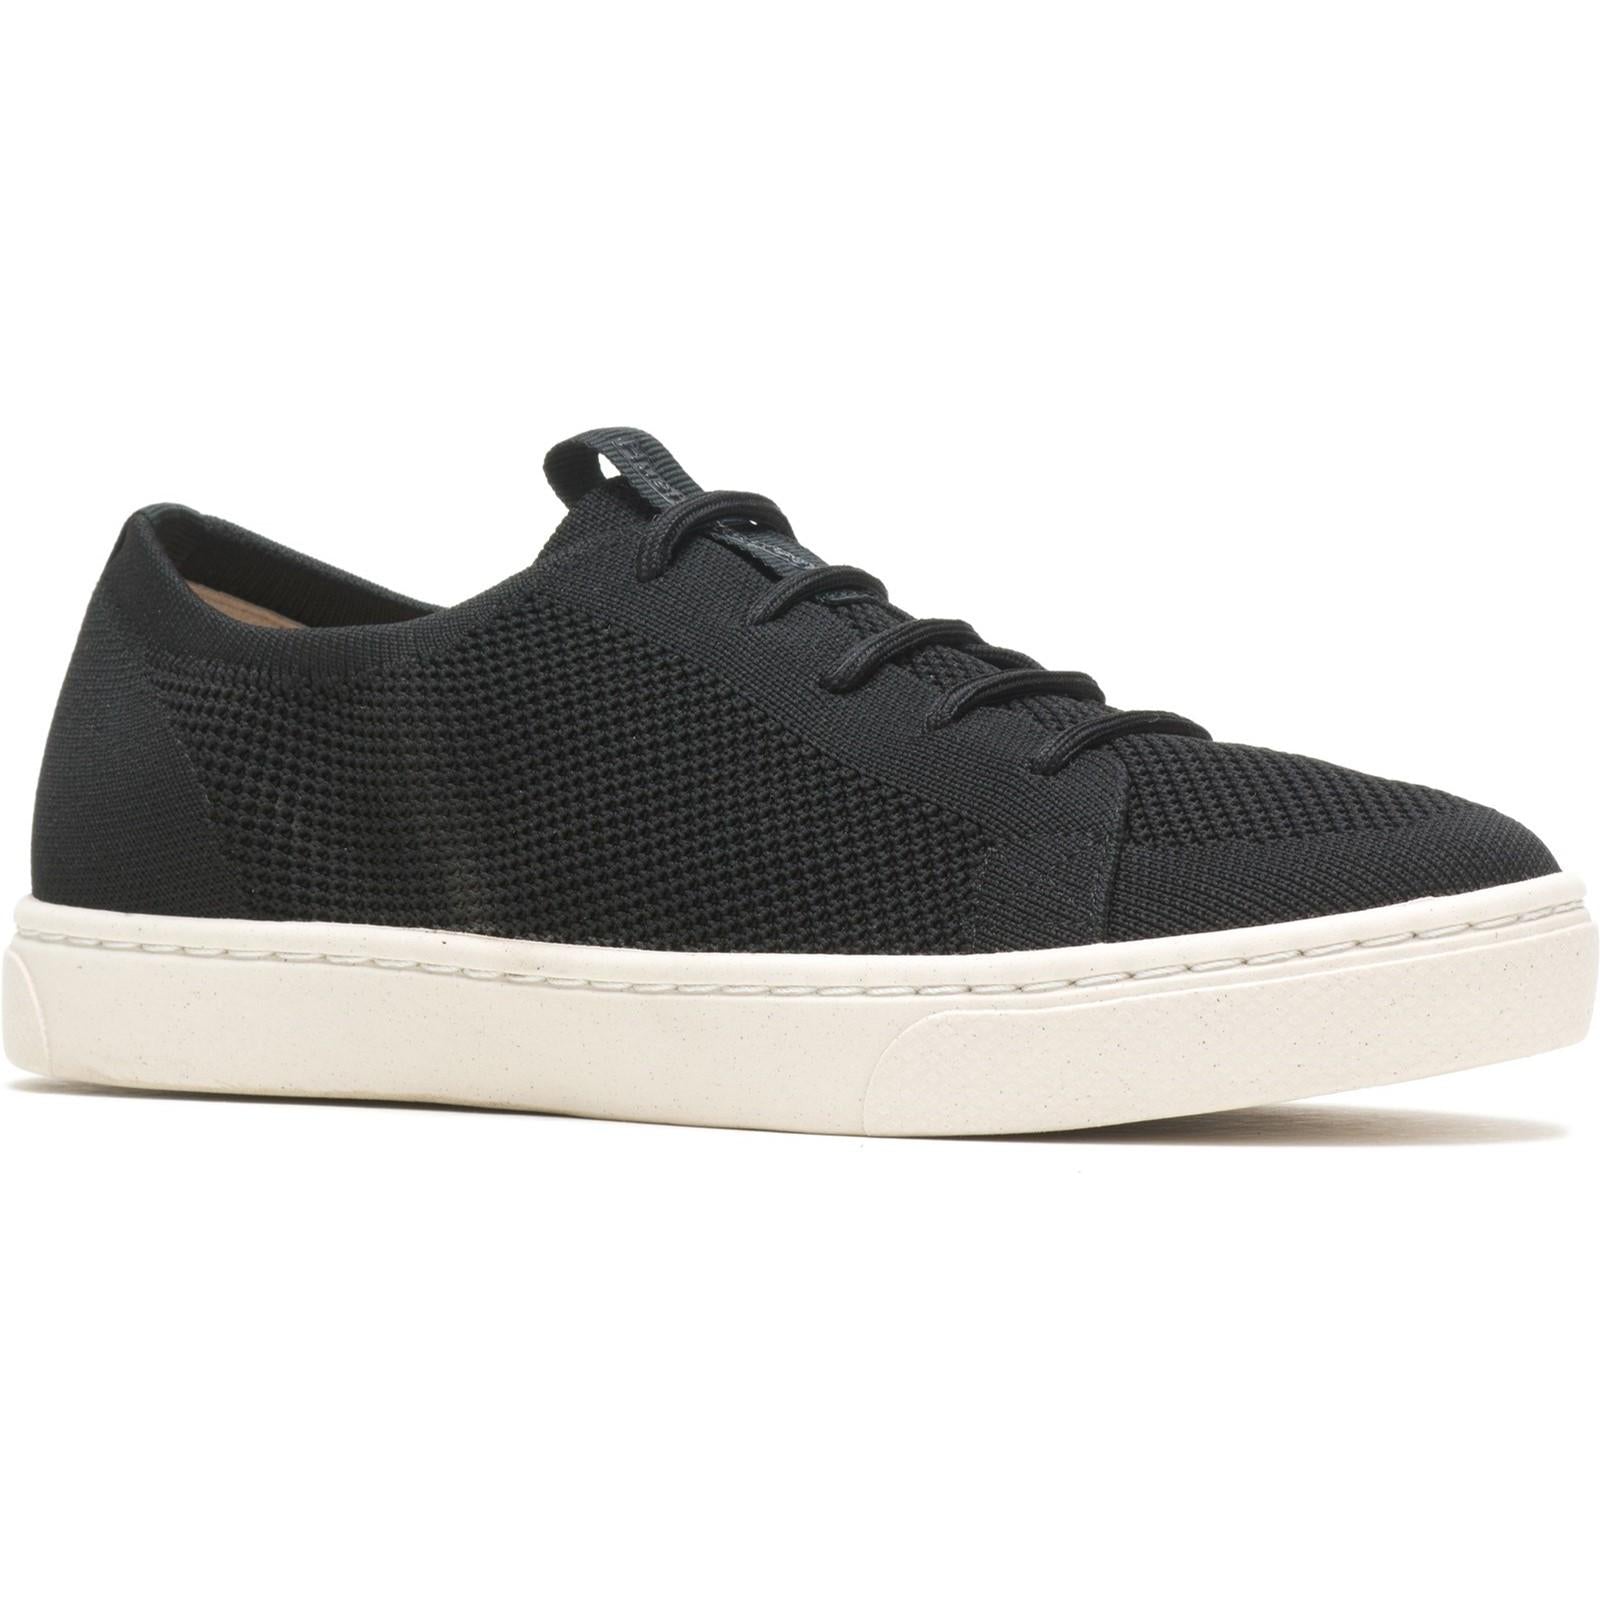 Hush Puppies Good Sneaker Trainers